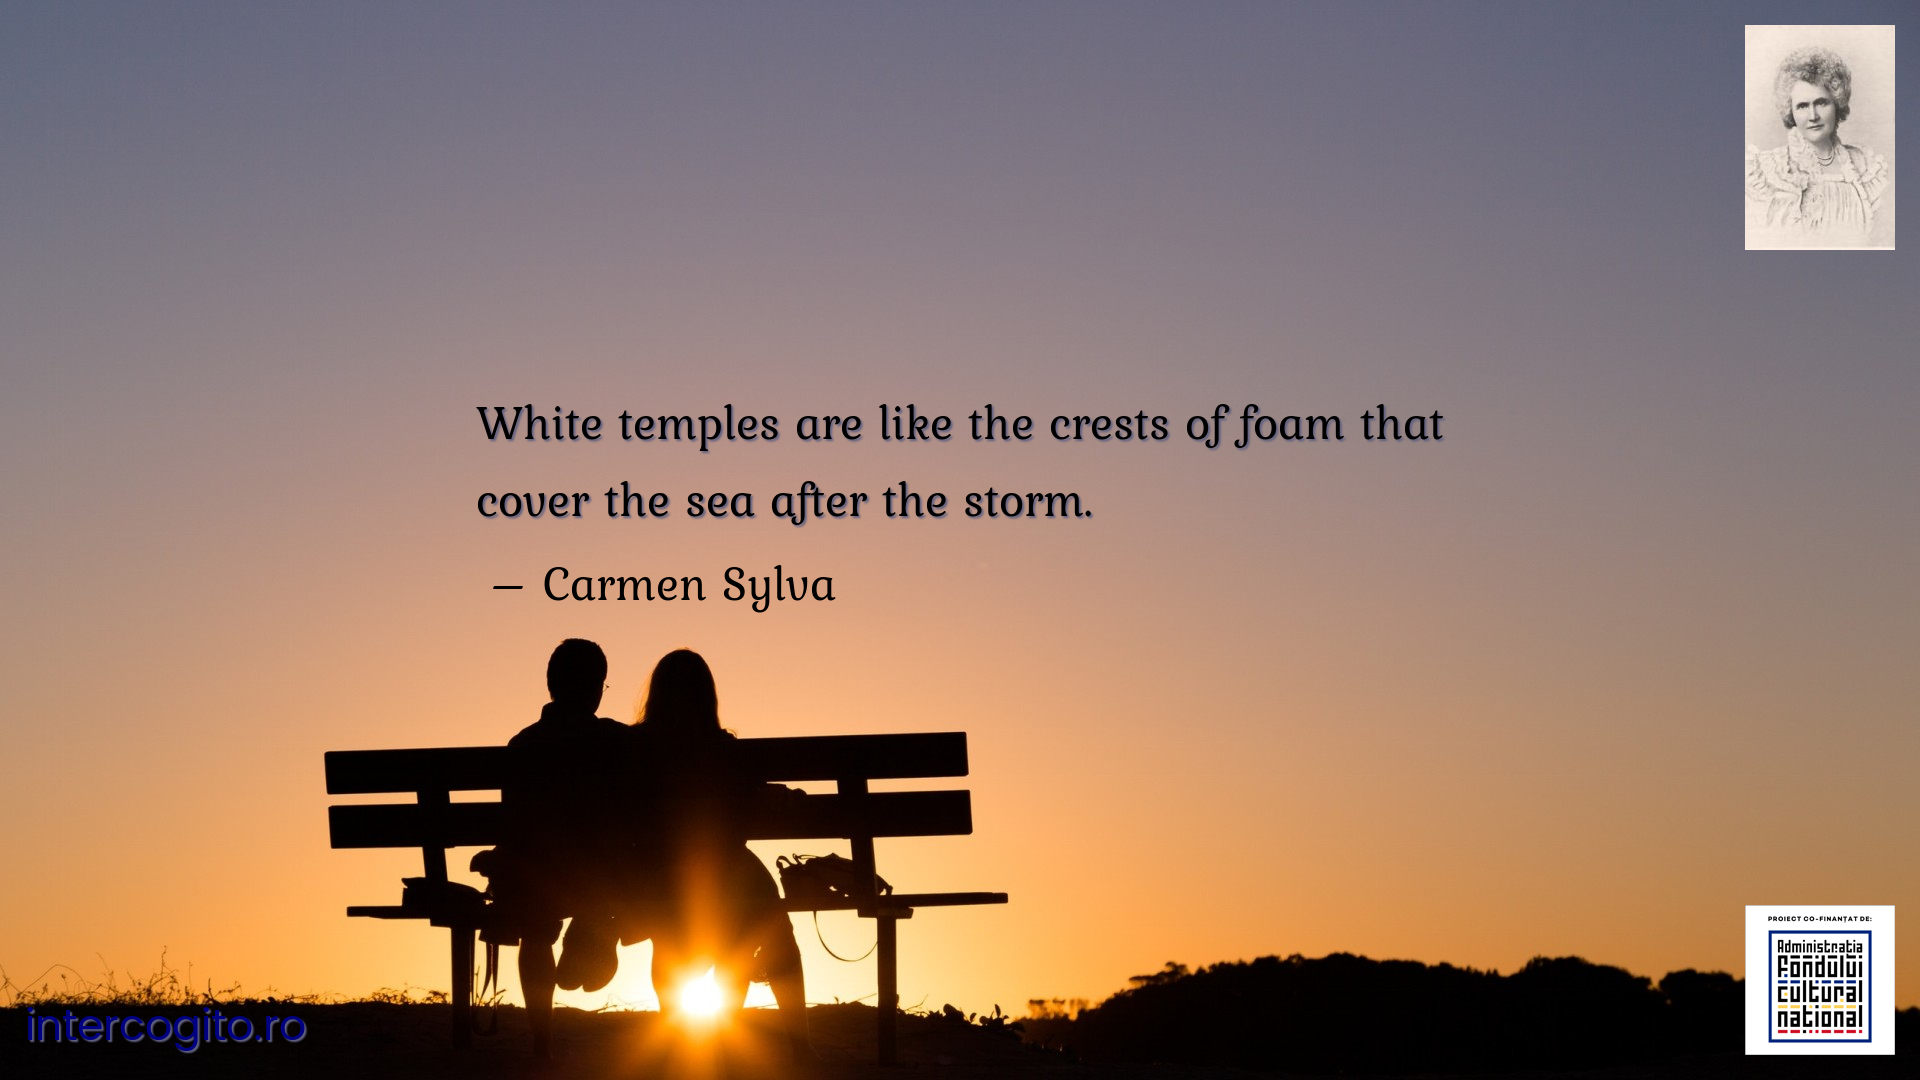 White temples are like the crests of foam that cover the sea after the storm.